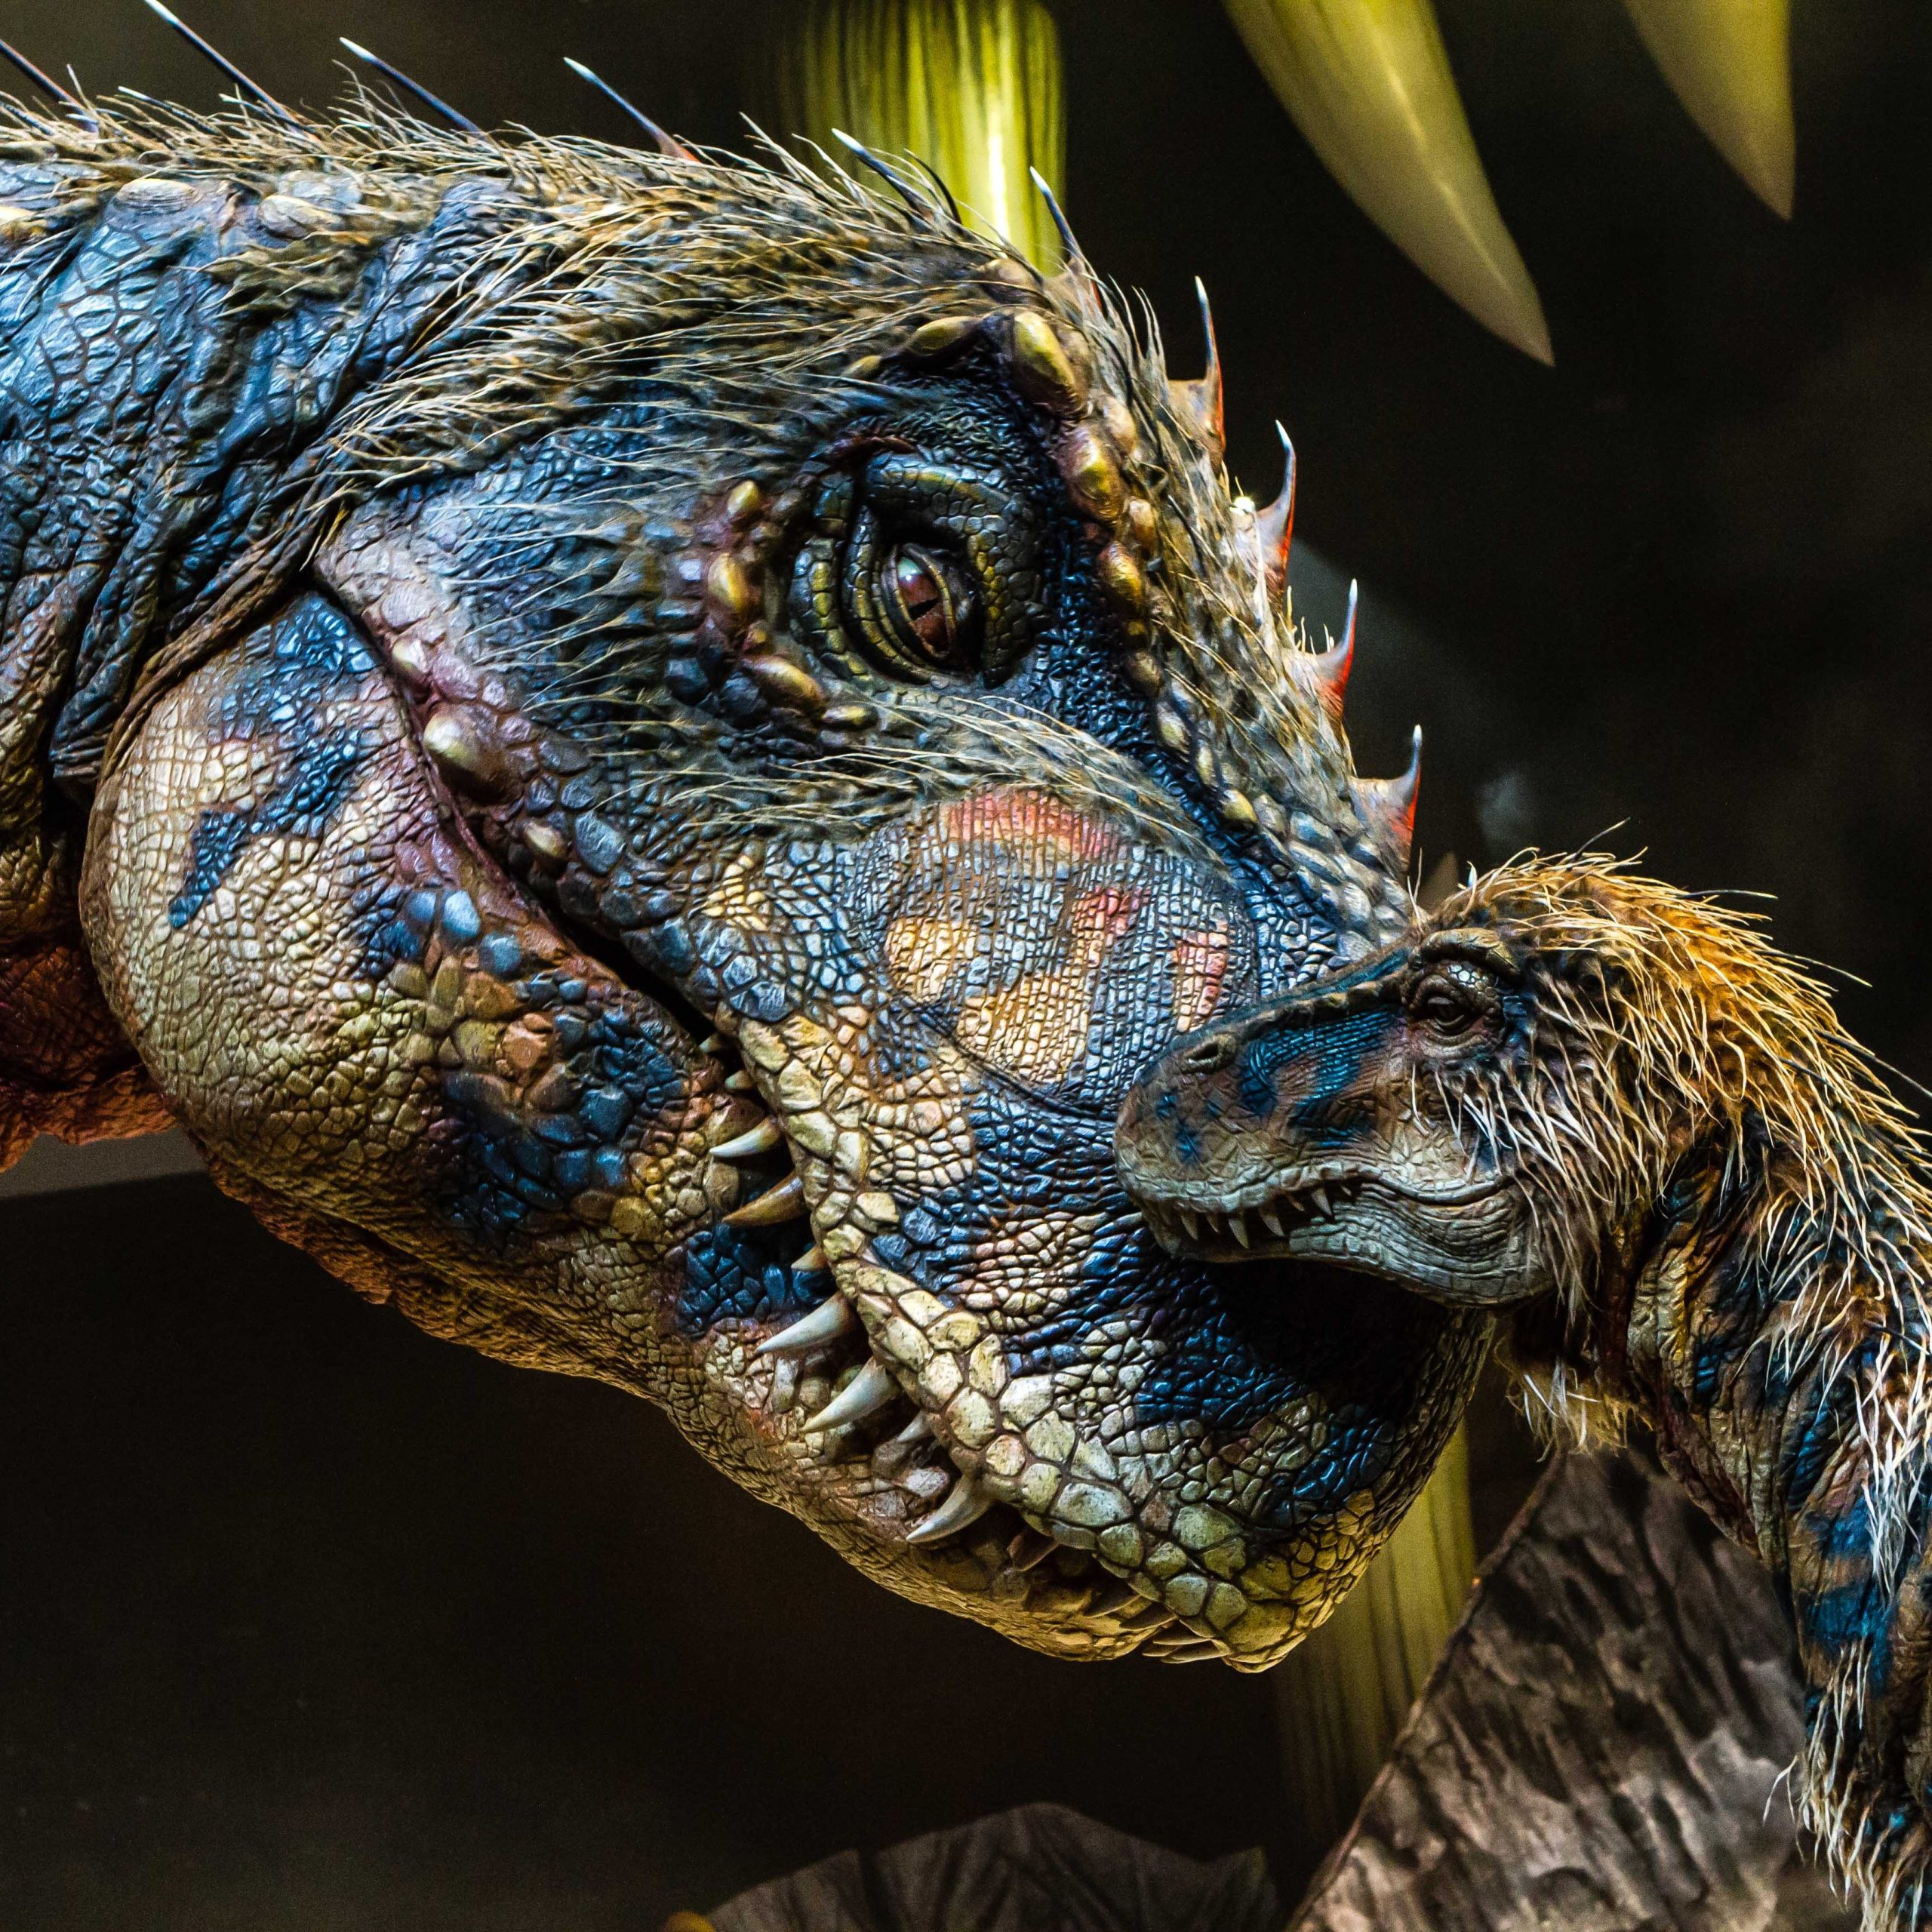 Walking with Dinosaurs stage show – review, Dinosaurs